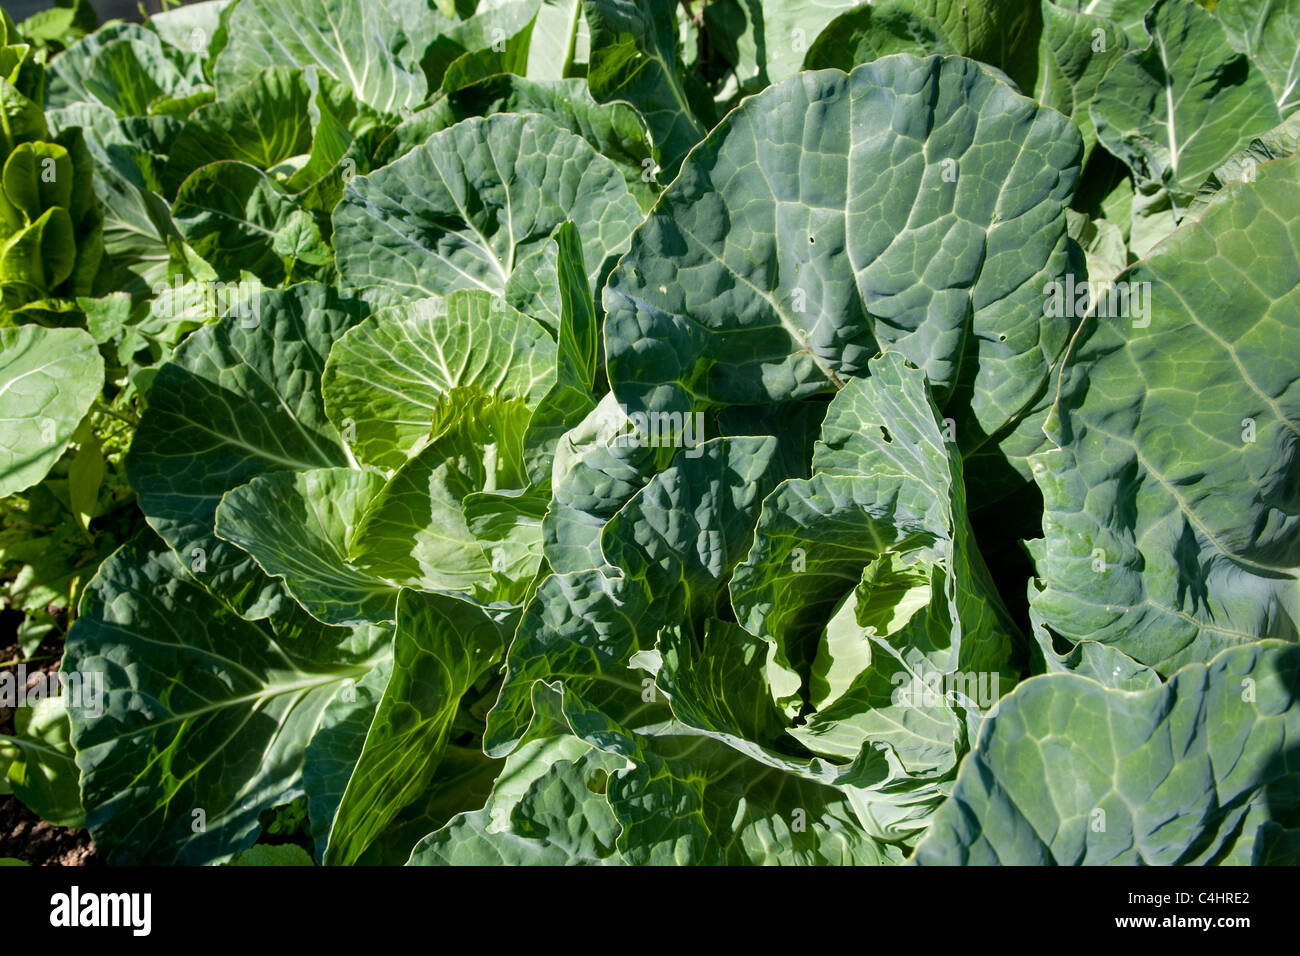 Home grown, organic green cabbages growing in garden in Bristol, uk Stock Photo